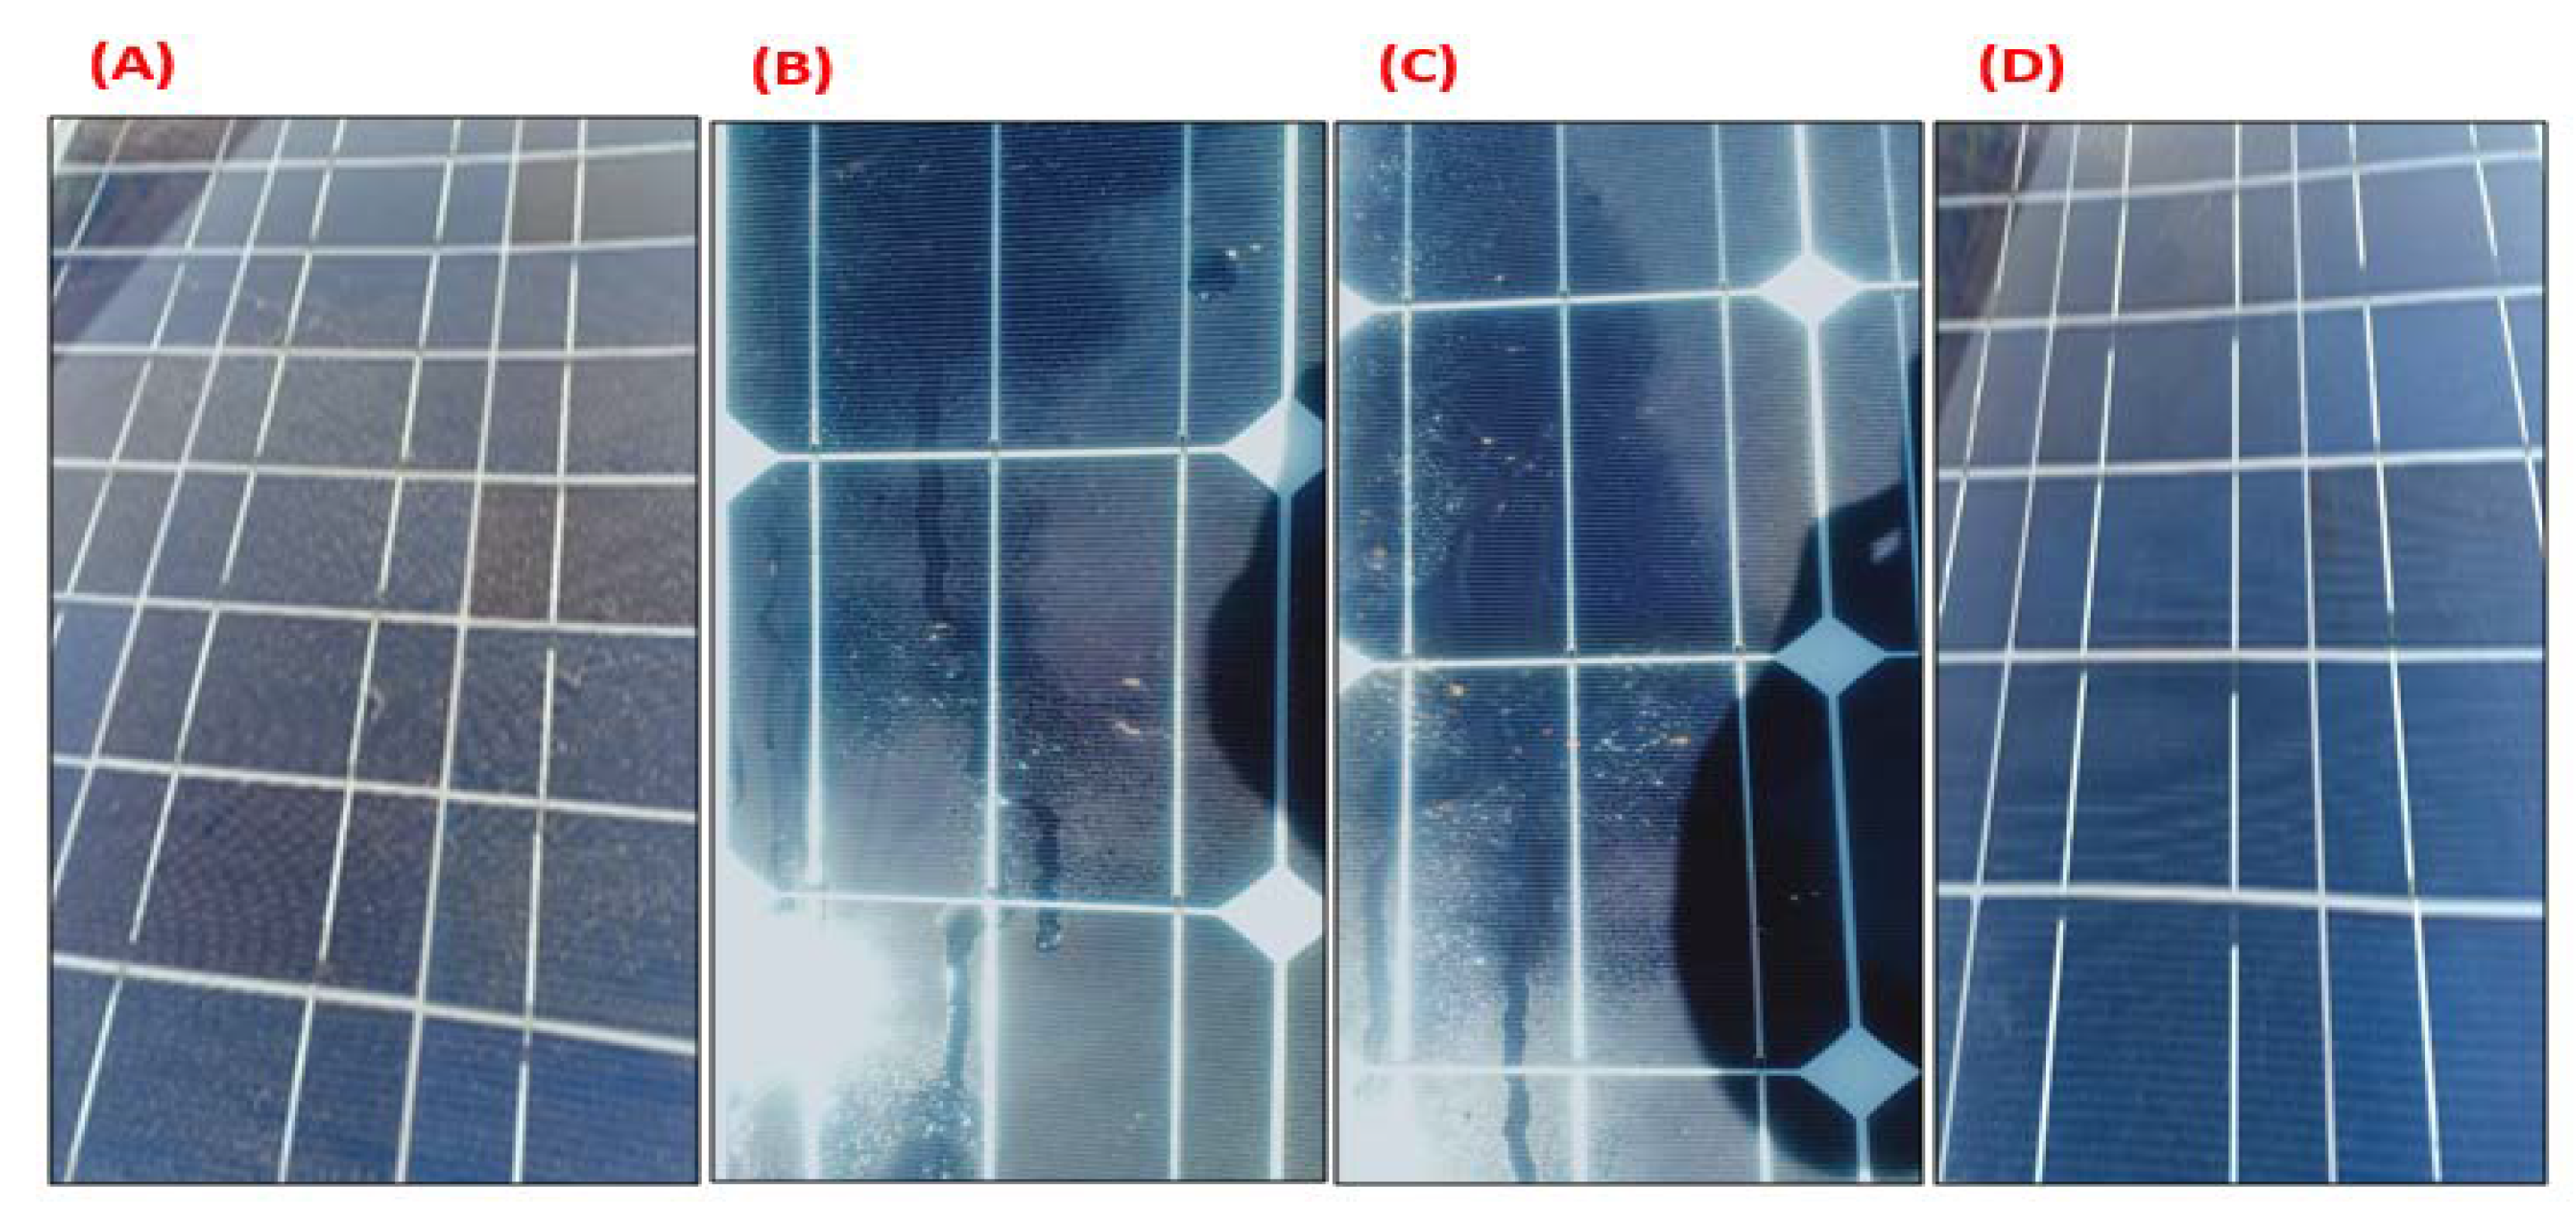 An active self-cleaning surface system for photovoltaic modules